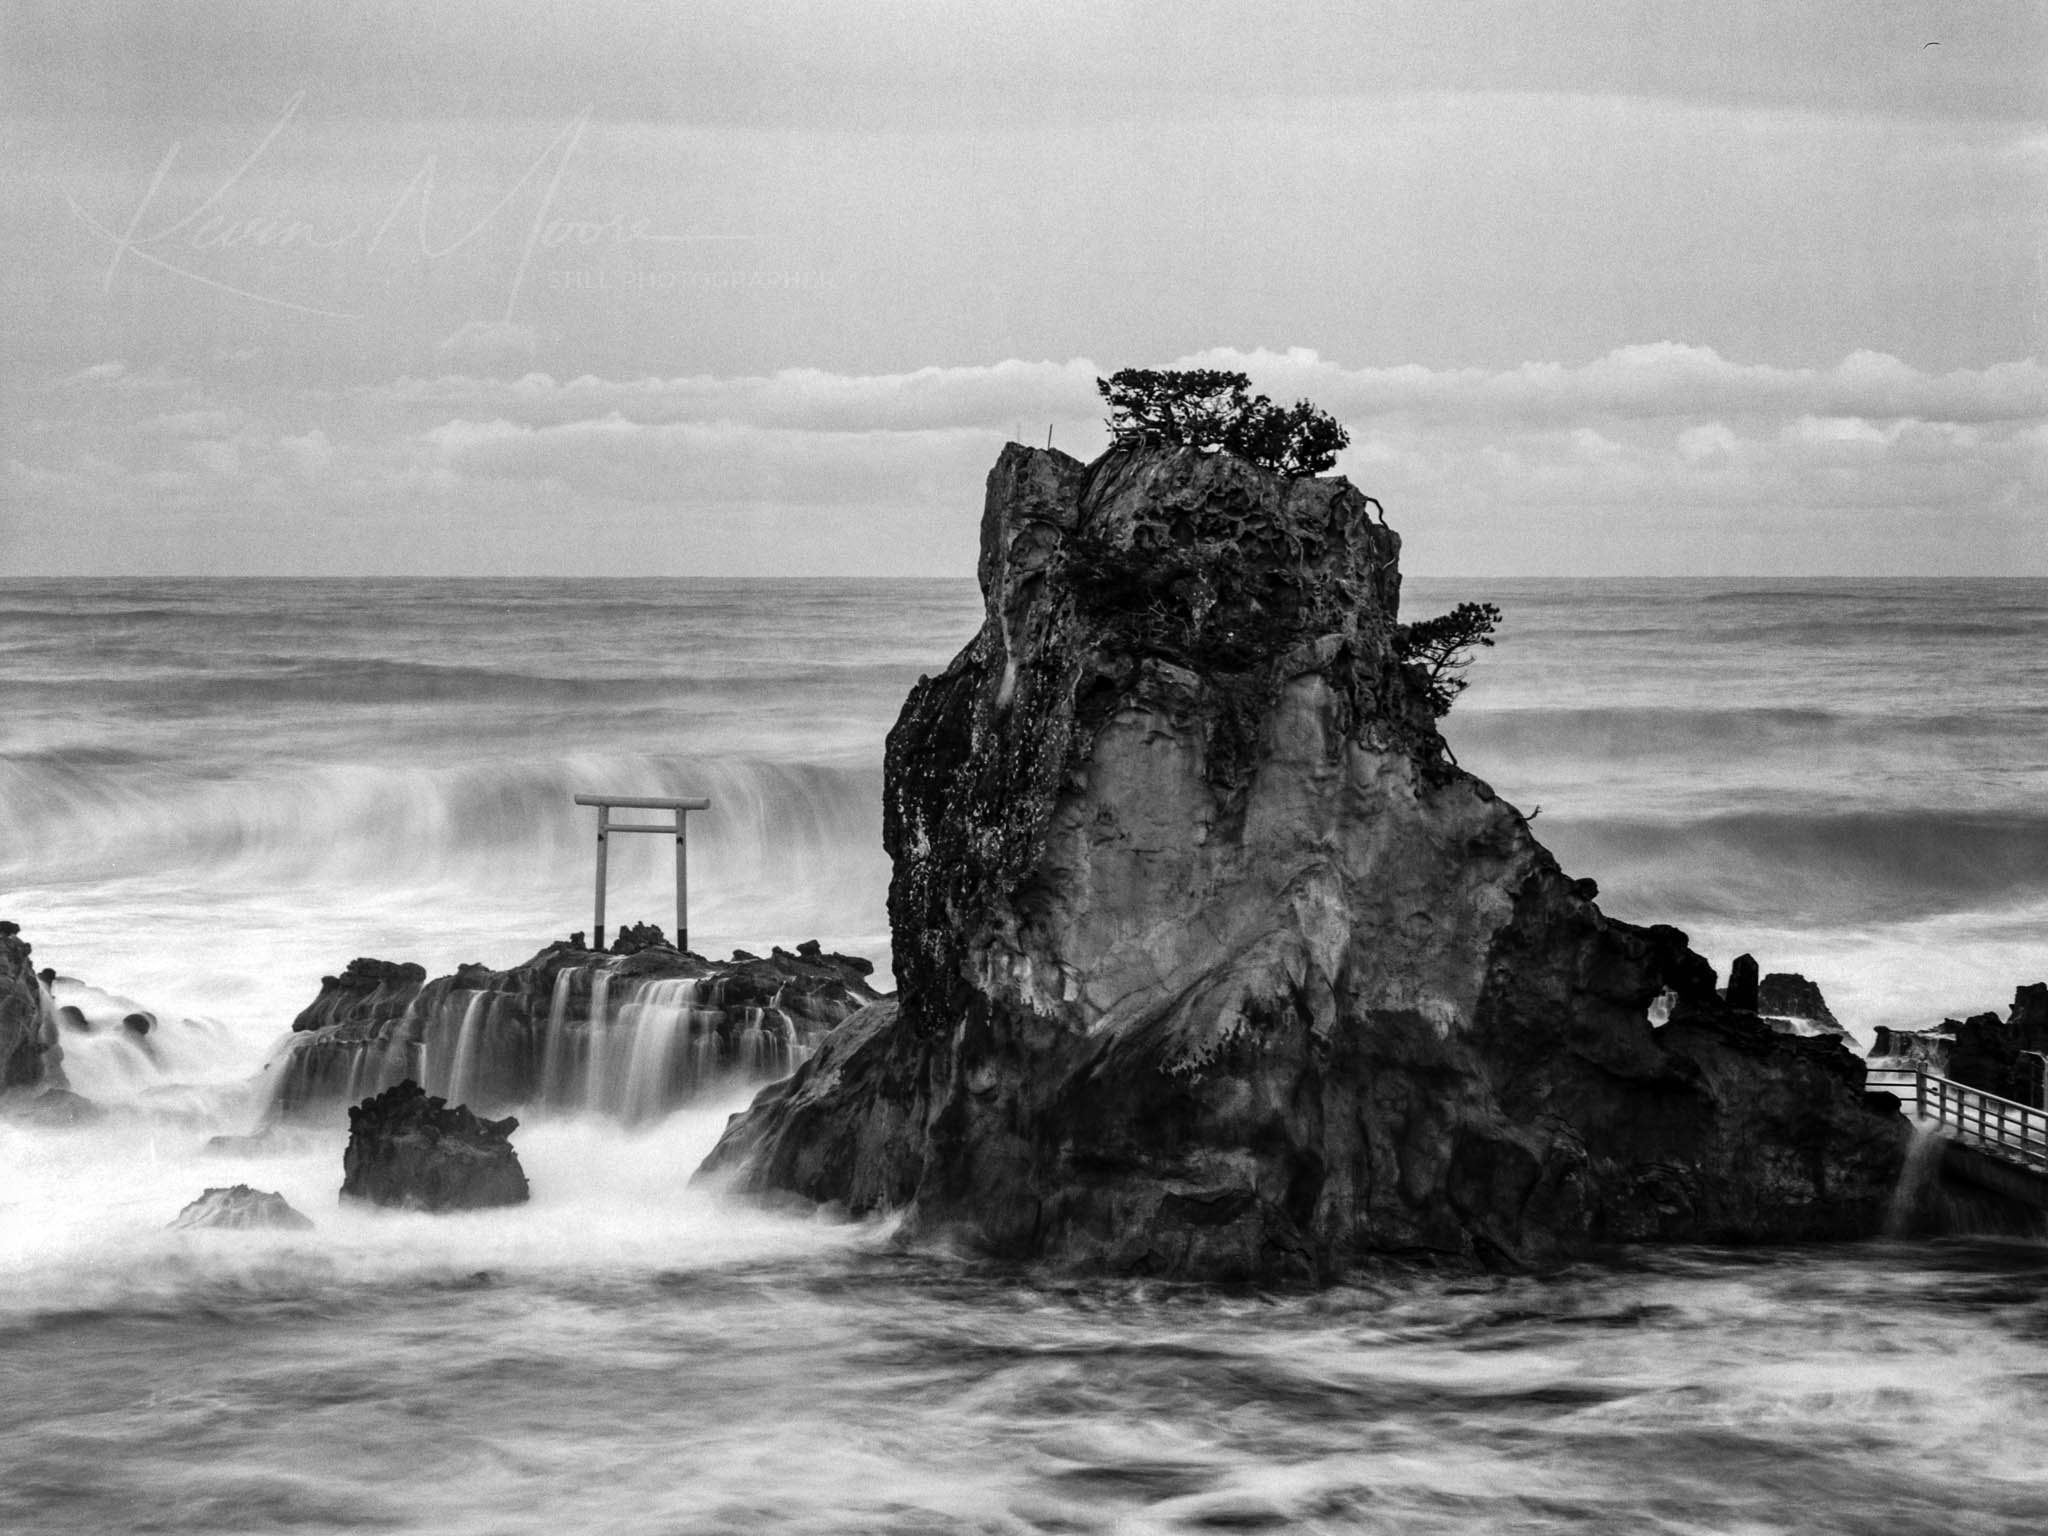 Monochrome image of rugged rock formation and Shinto shrine amidst turbulent seas.